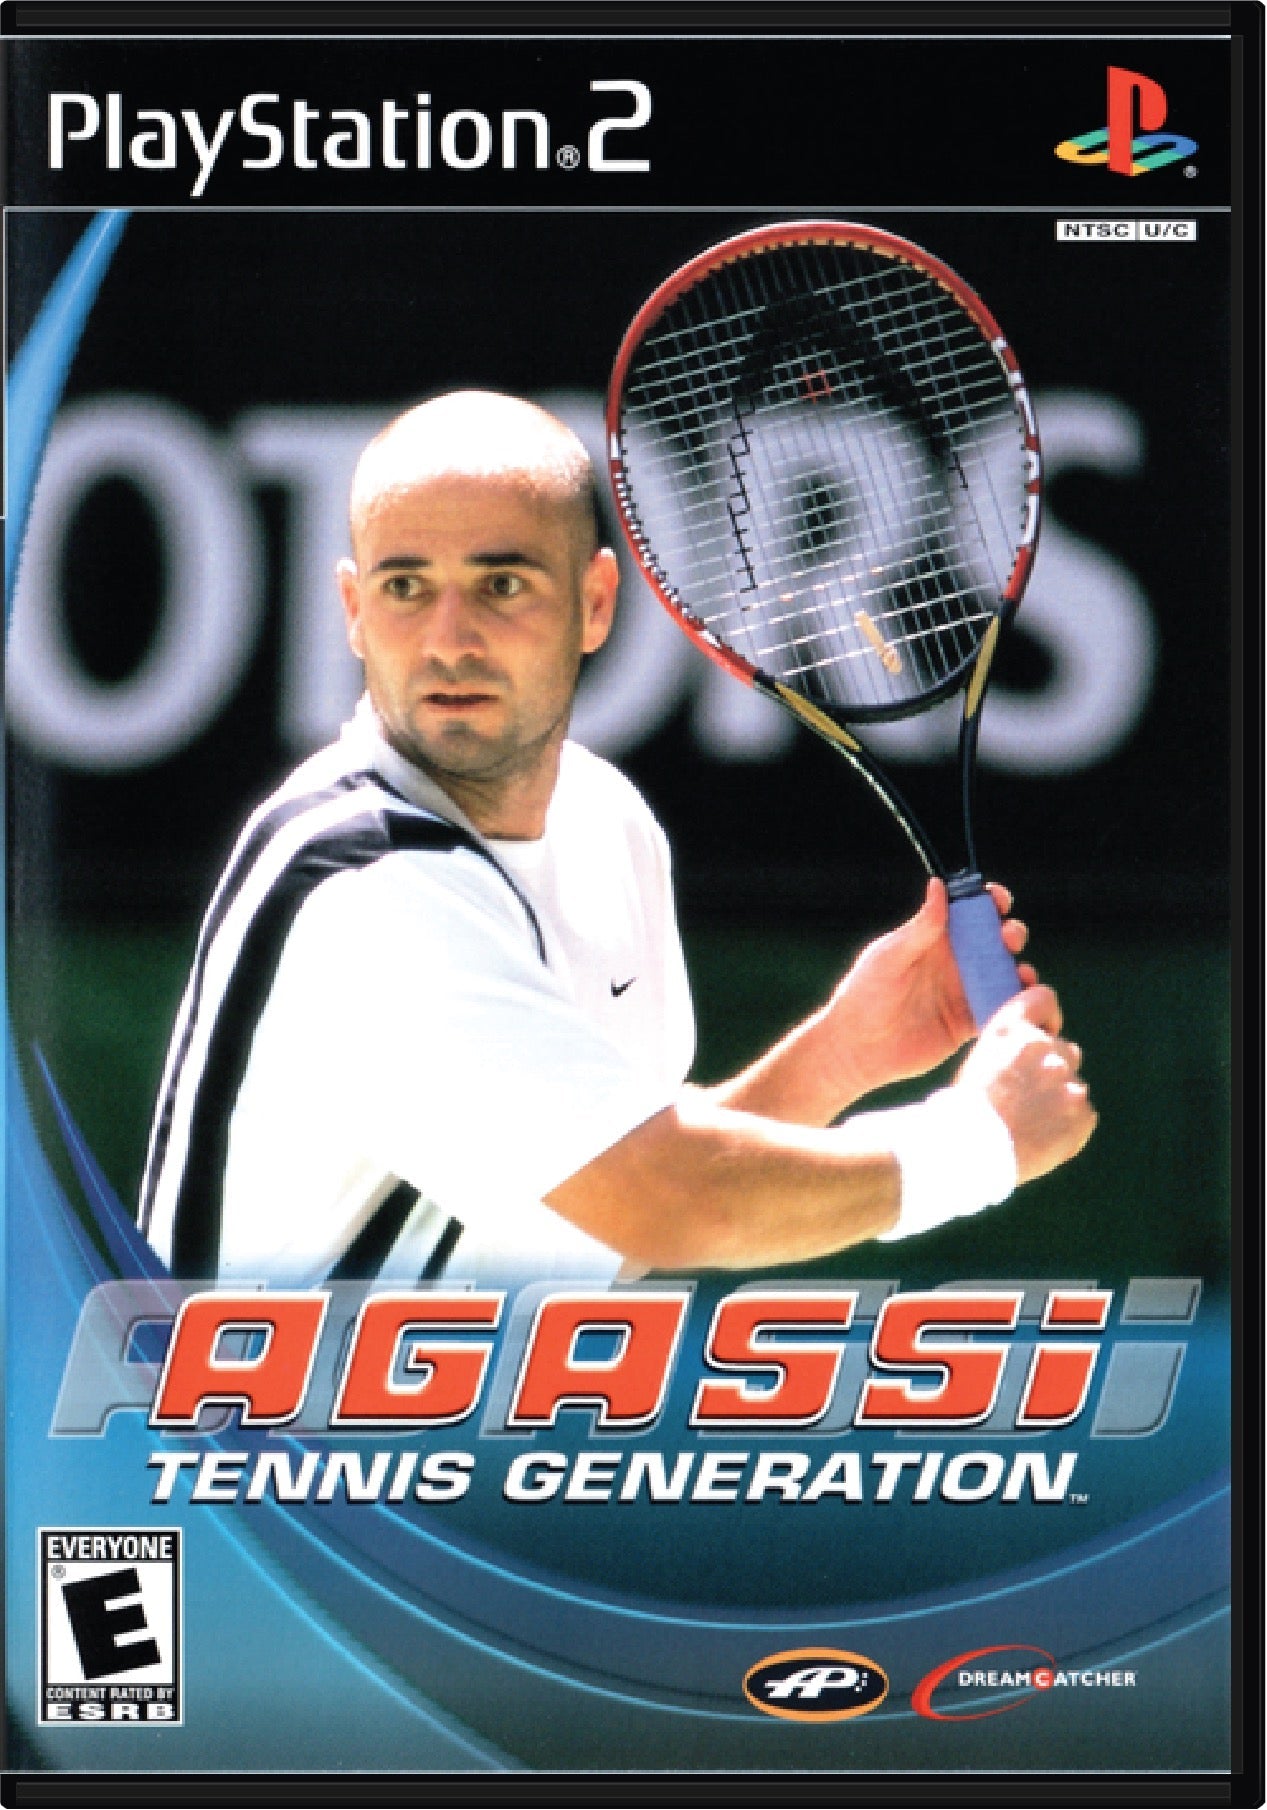 Agassi Tennis Generation Cover Art and Product Photo